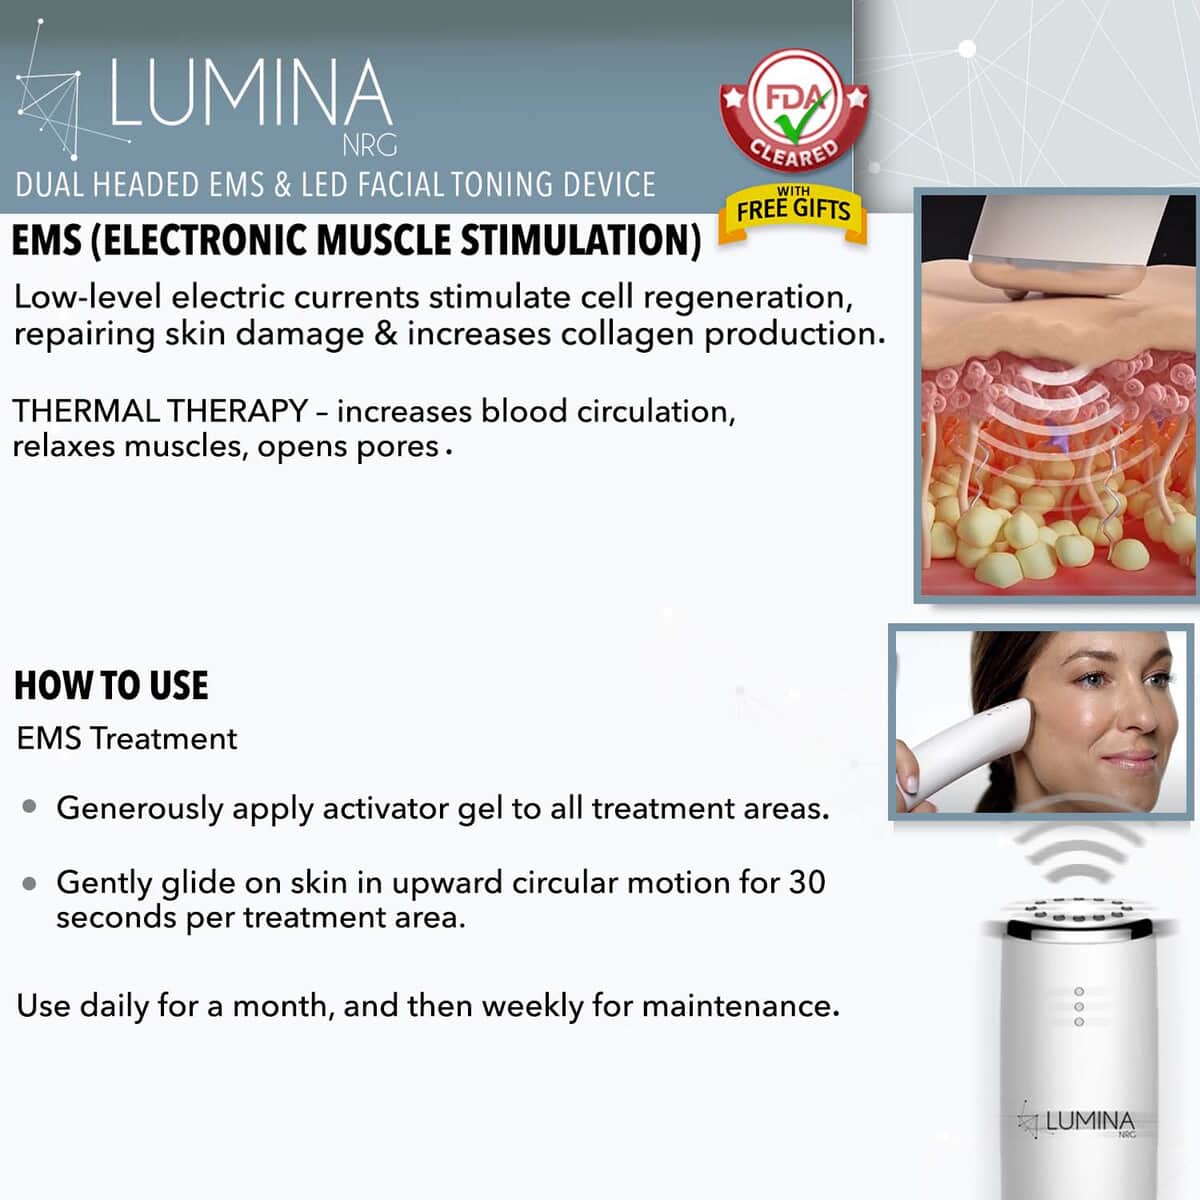 Lumina NRG FDA Cleared Dual Headed EMS & LED Facial Toning Device with Free Gifts image number 3